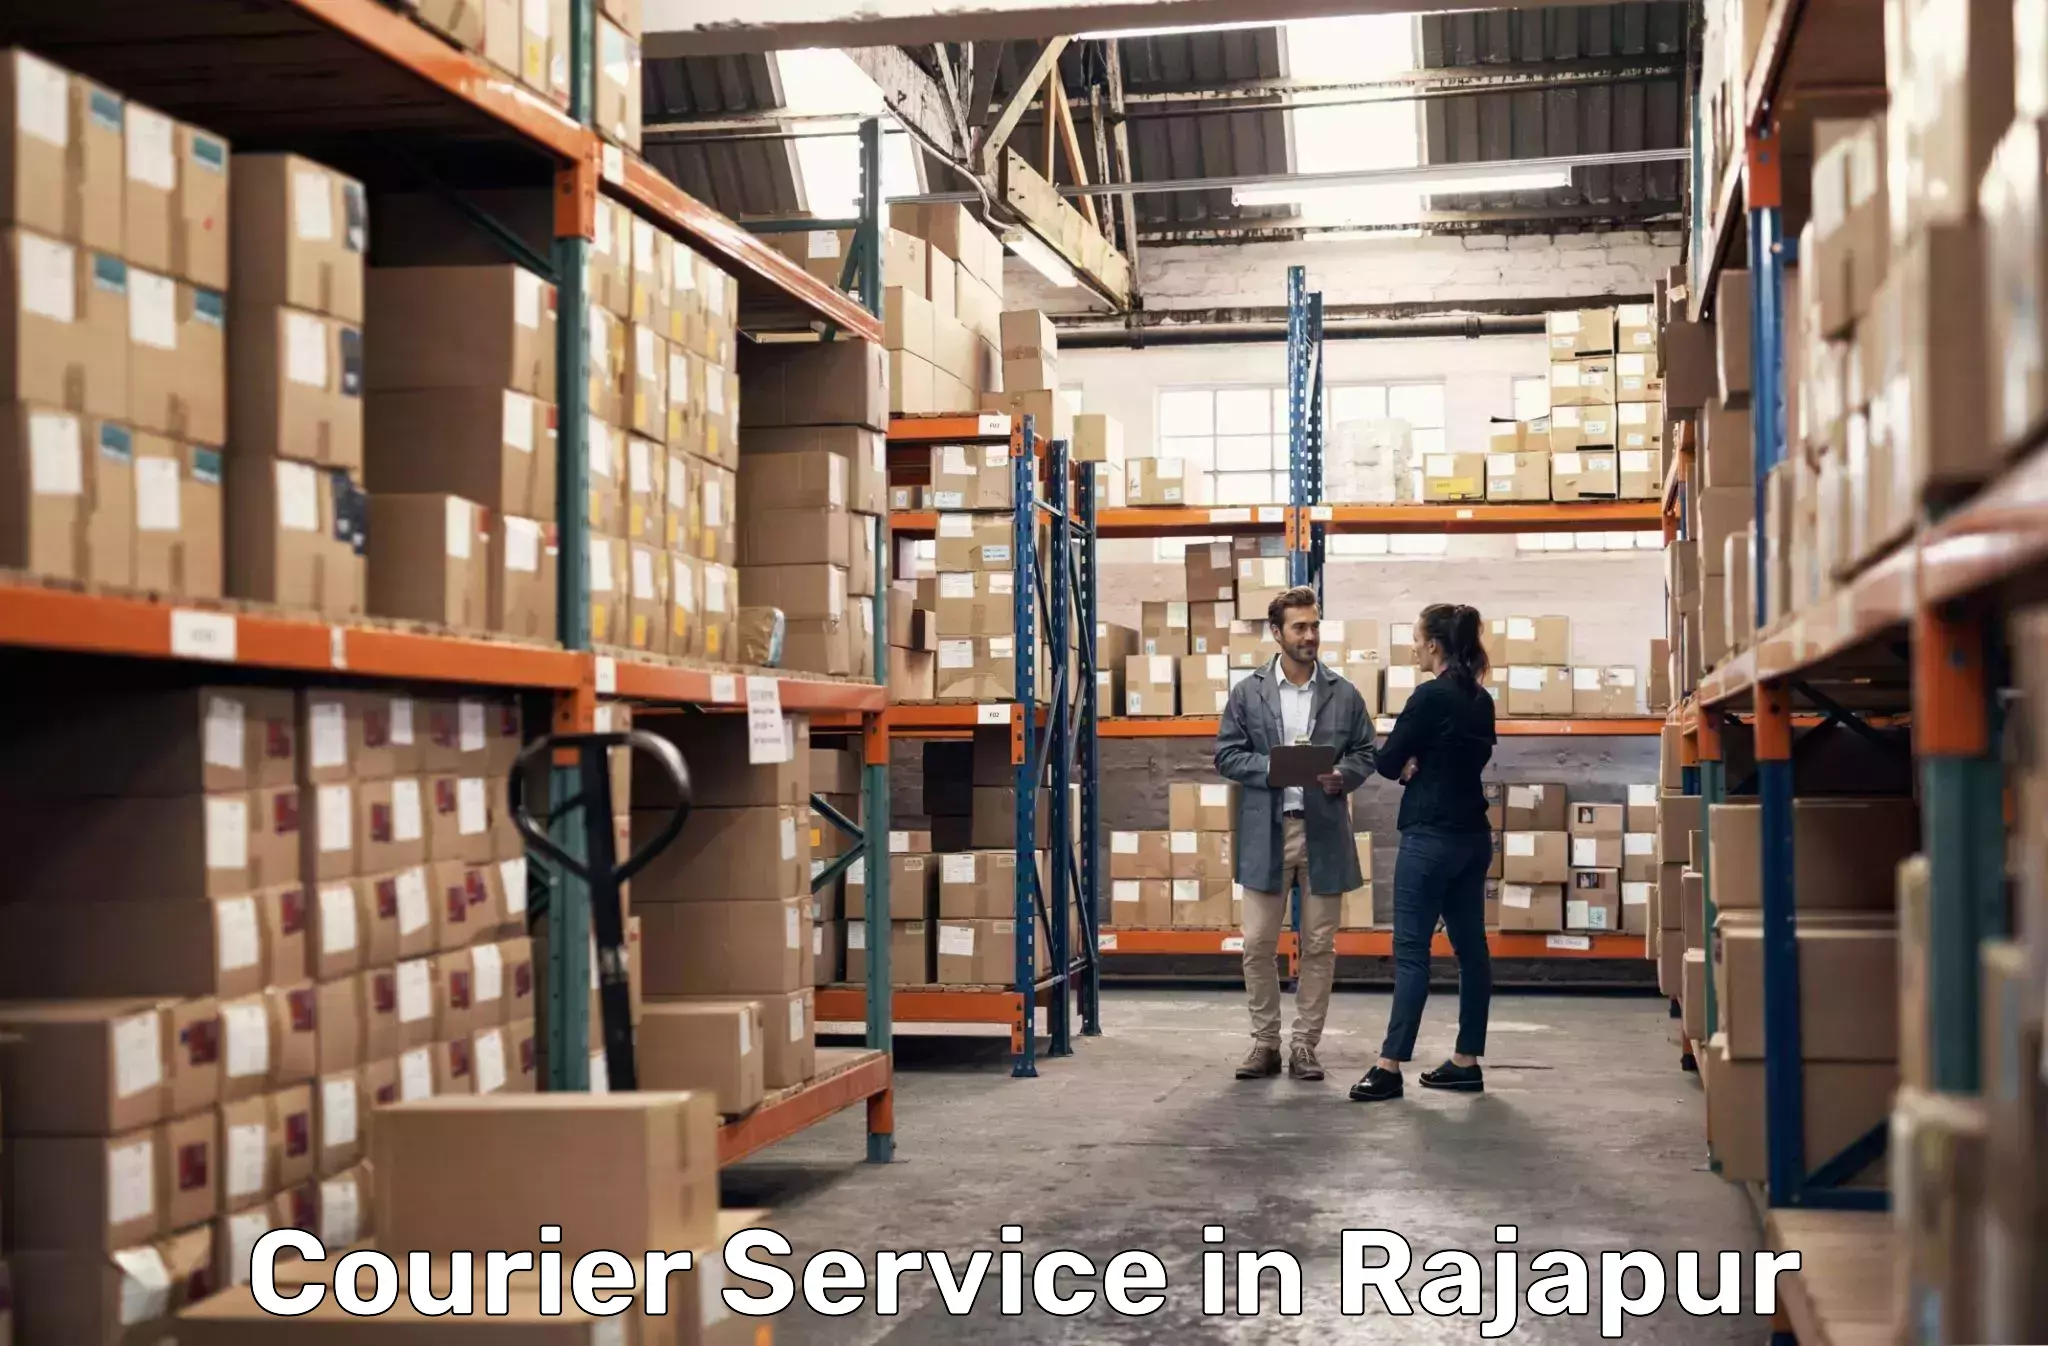 Courier service partnerships in Rajapur